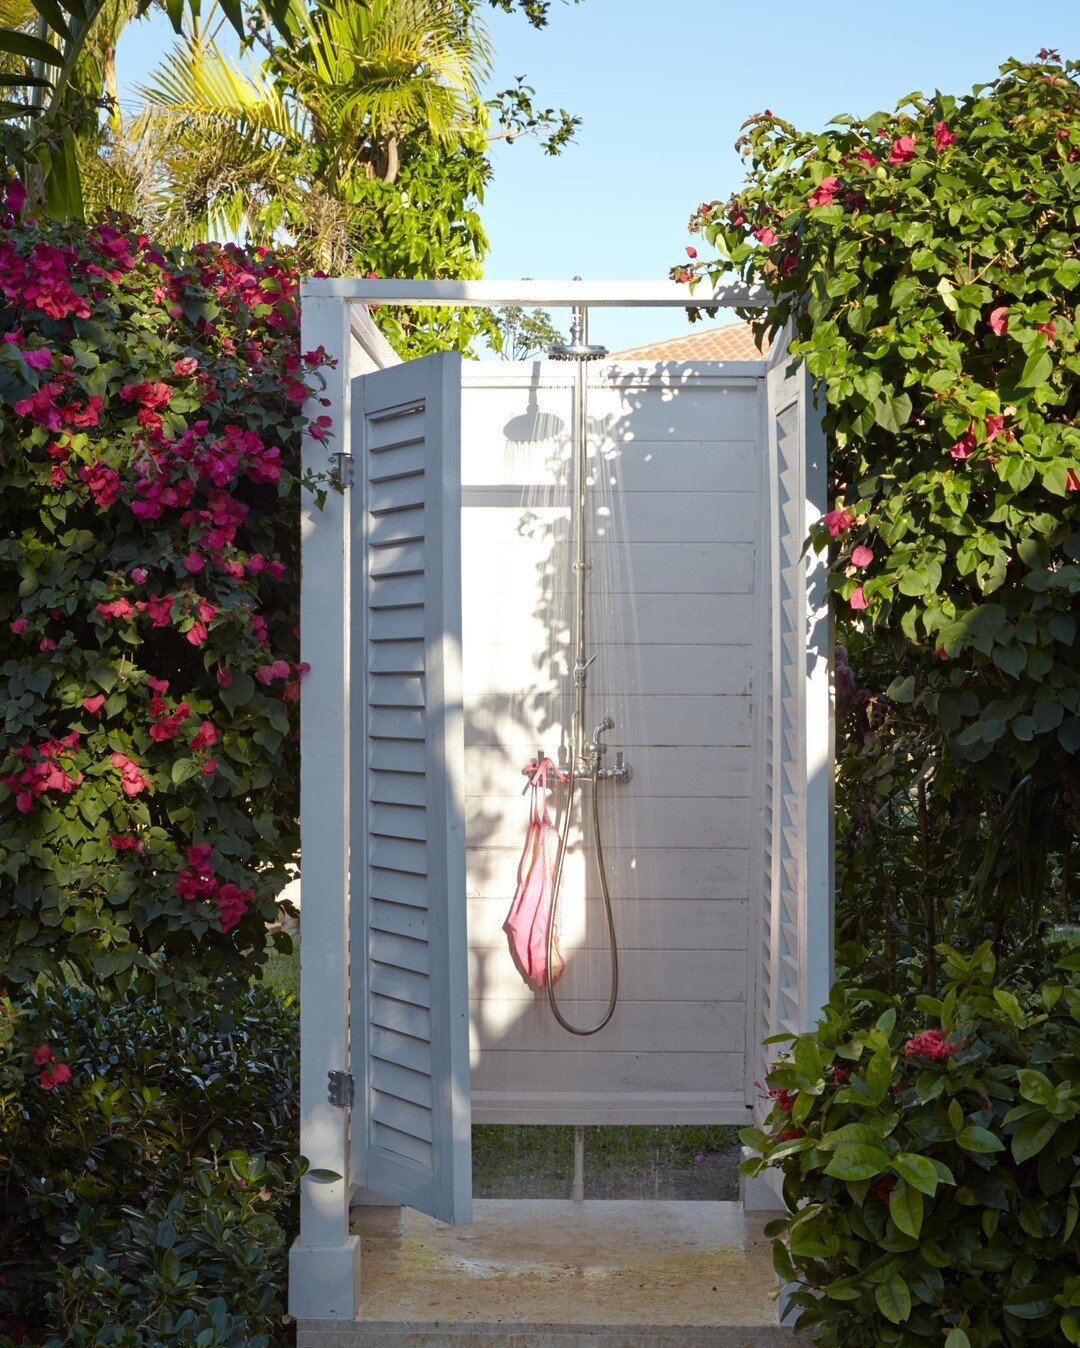 &quot;An outdoor shower comes in handy near the beach. This one is located between the pool and the golf cart shed, a convenient stop for anyone heading toward the house after a swim.&quot; - Amanda quoted from her book, Island Hopping 📔✨🌴⠀⠀⠀⠀⠀⠀⠀⠀⠀